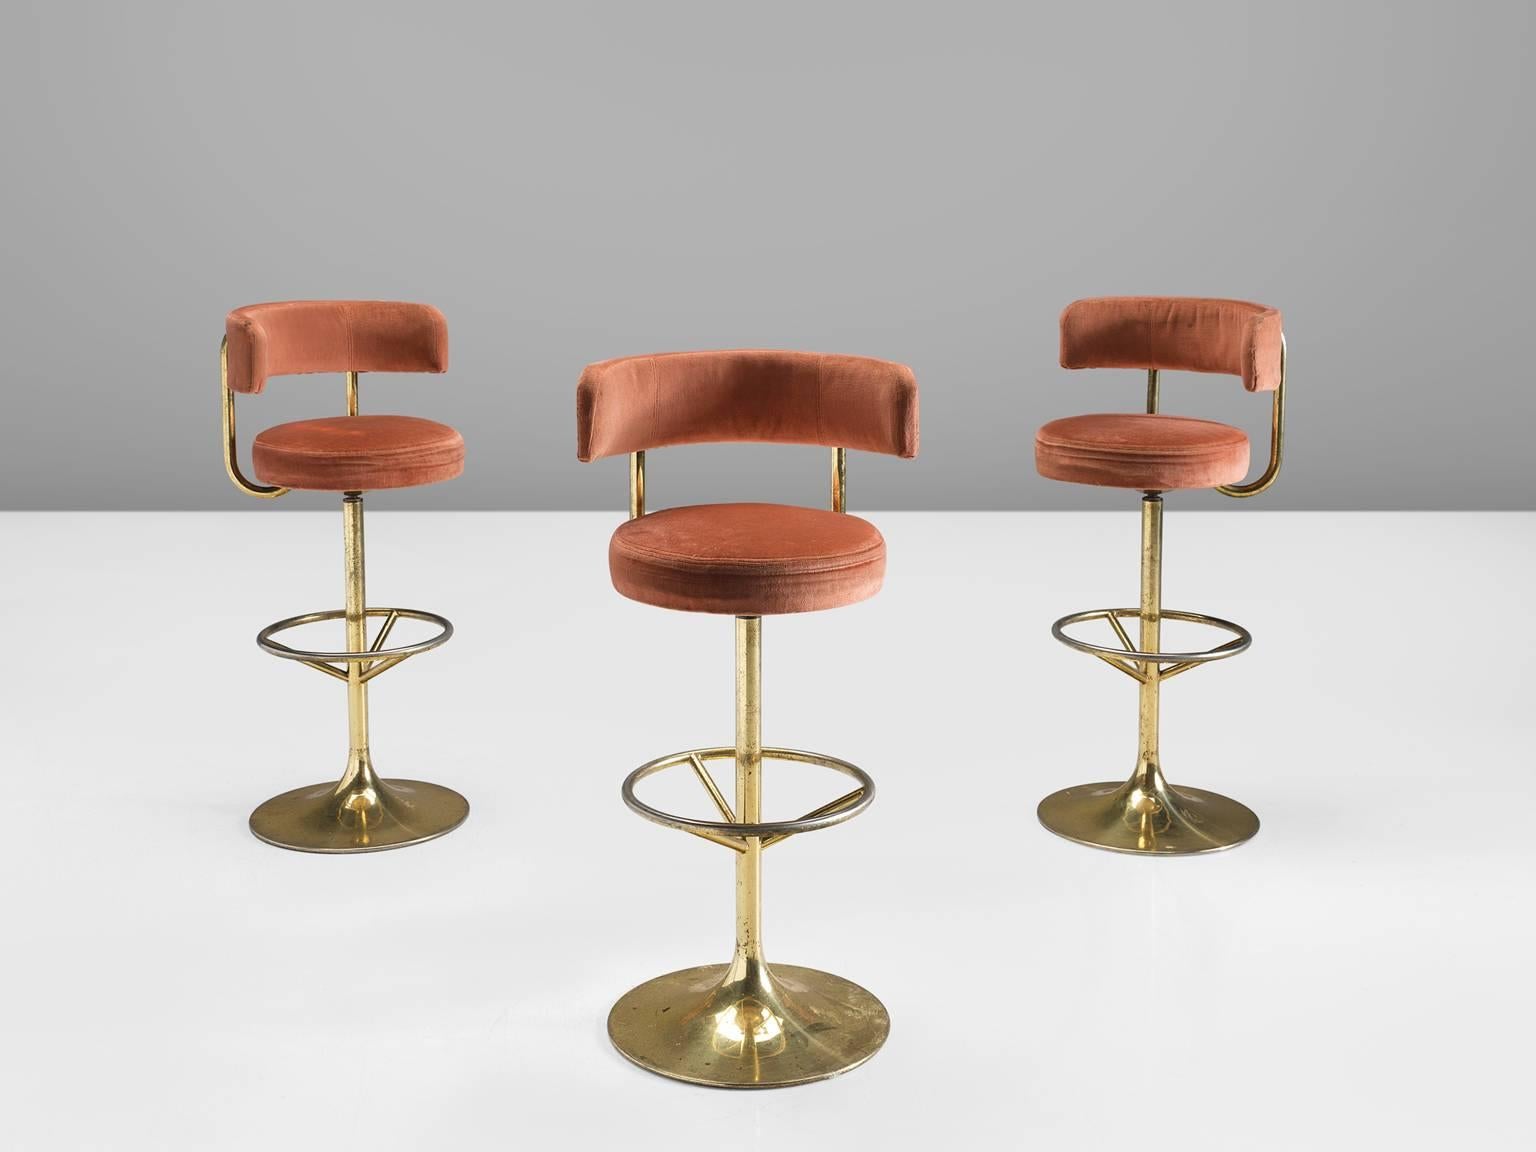 Borje Johanson for Johanson Design, set of three barstools as part of 'Johanson Jupiter Collection', in brass coloured metal and pink fabric, Sweden, 1970s.

Highly comfortable high barstools in pink velvet upholstery. Due to the soft seat and